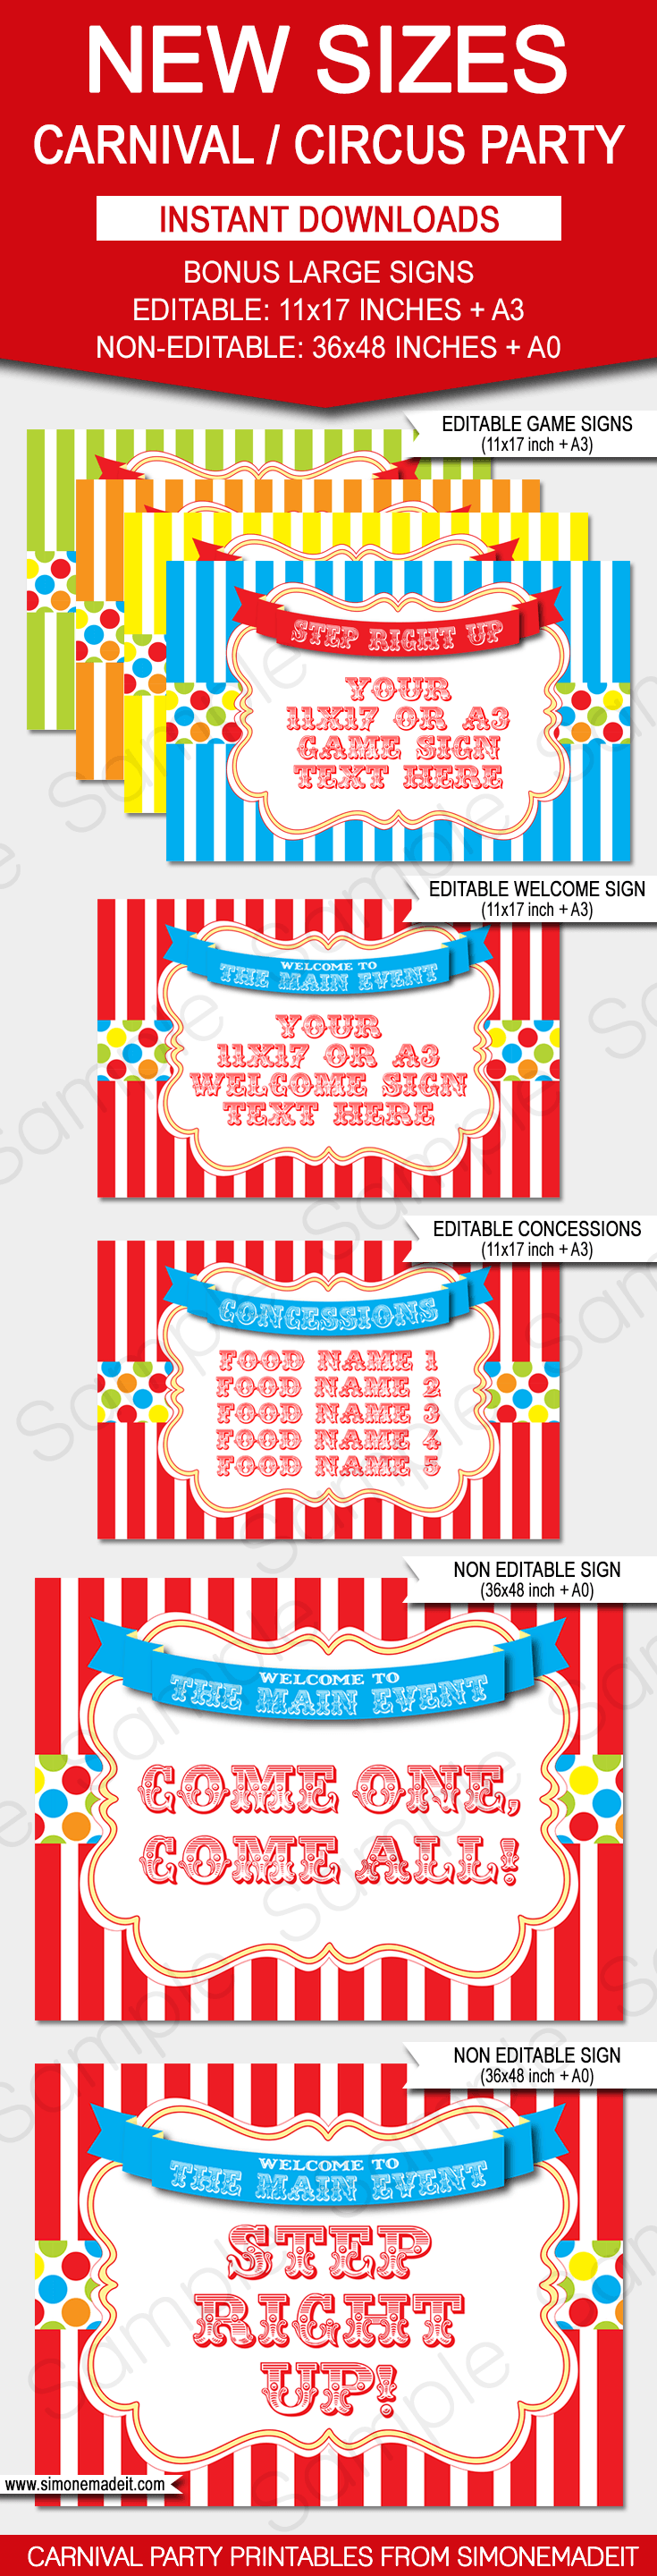 Carnival Signs | Circus Signs | Circus Theme Party | Carnival Theme Party | Welcome Sign | Concessions Sign | Game Signs | Party Decorations | via SIMONEmadeit.com